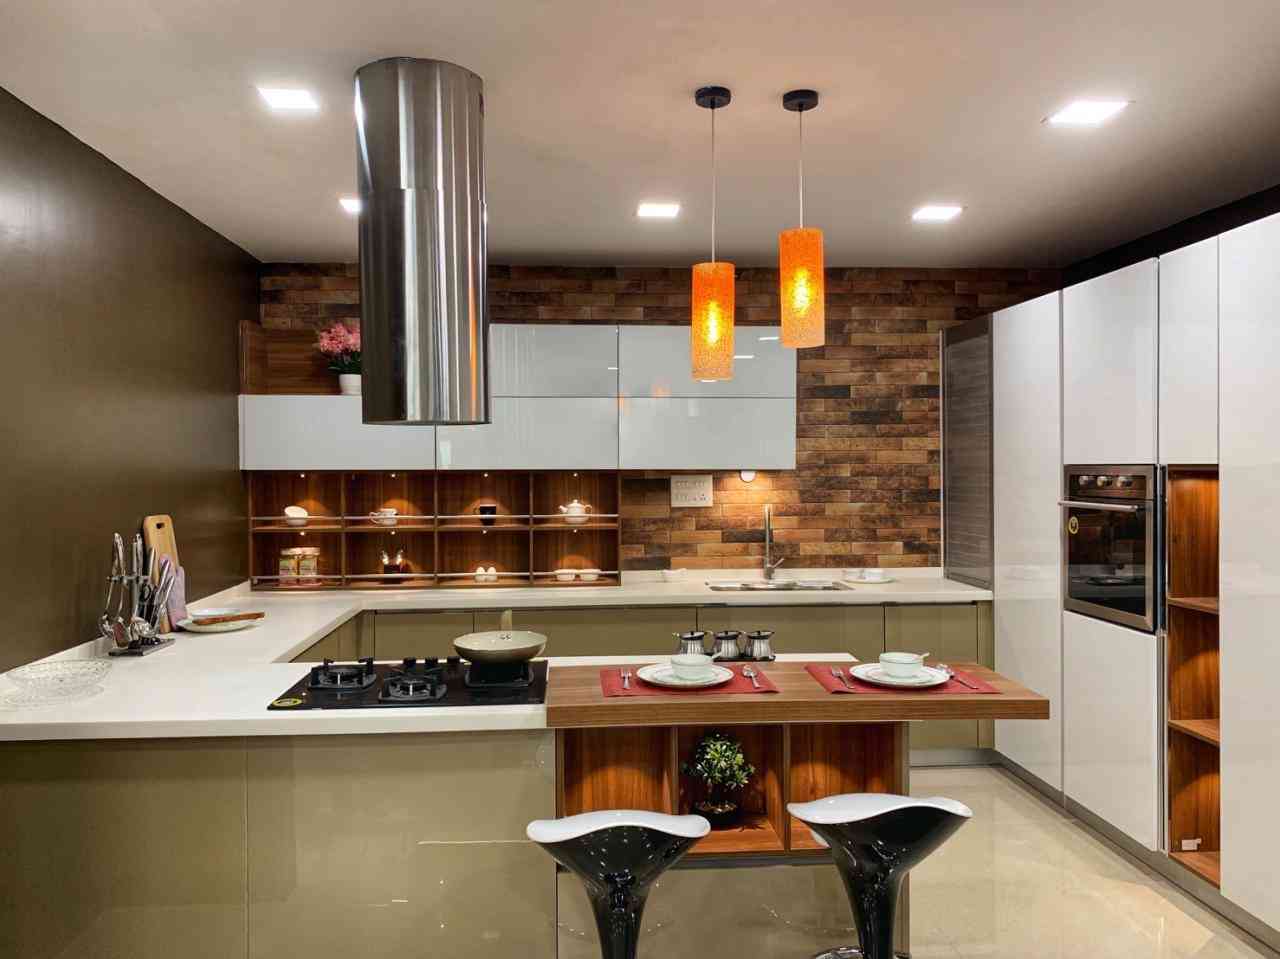 Modular Kitchen Design With Spacious Drawers And Kitchen Cabinet Design